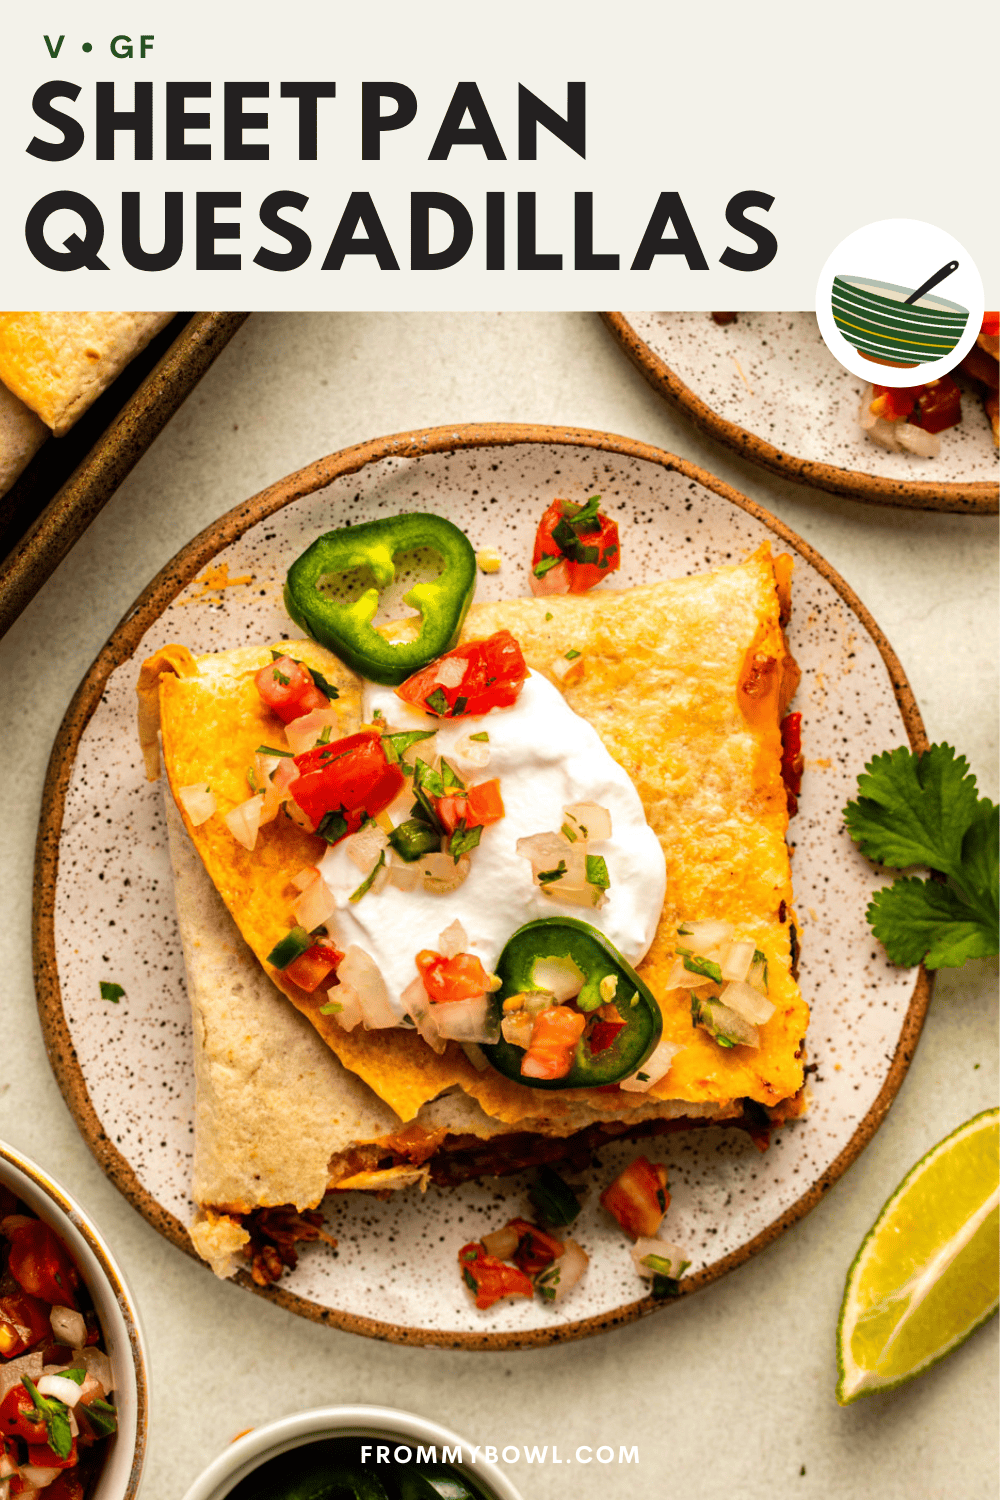 a slice of sheet pan quesadillas served in a plate topped with salsa, sour cream and jalapeno slices